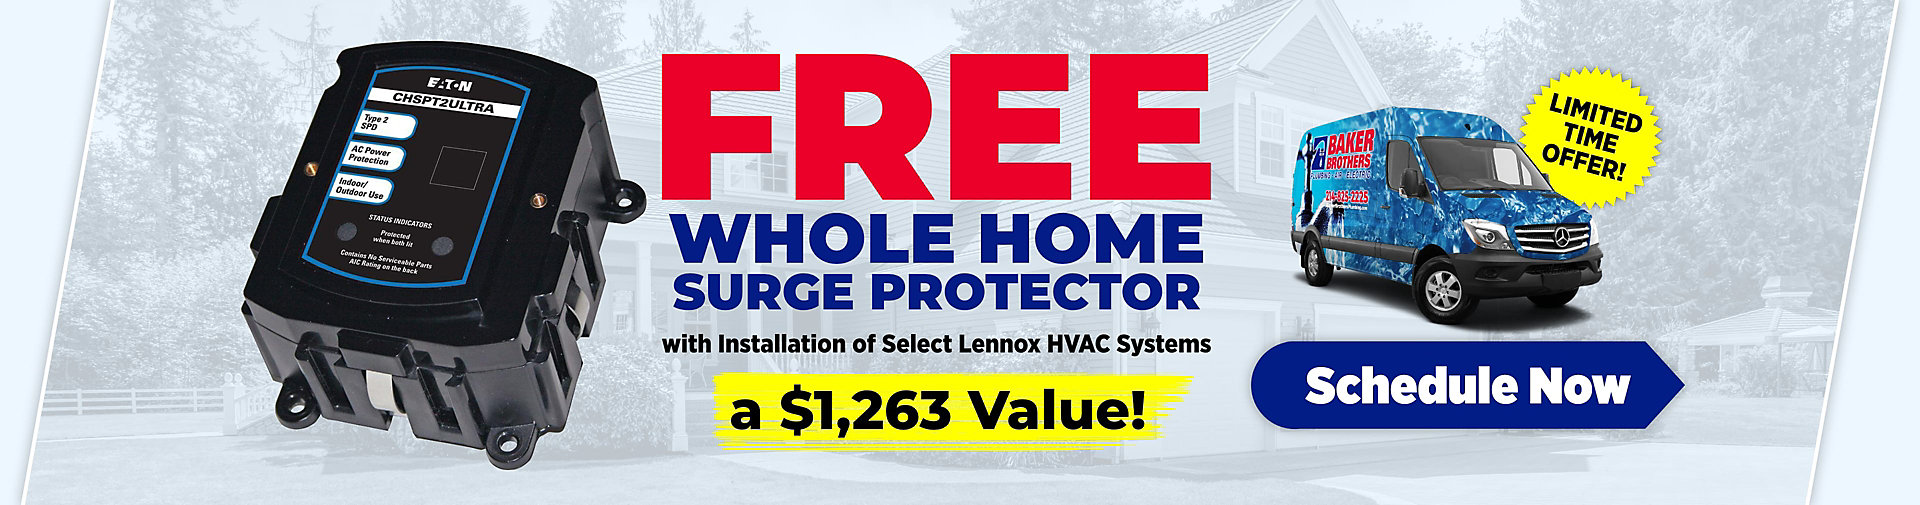 FREE Whole Home Surge Protector with Select Lennox Systems